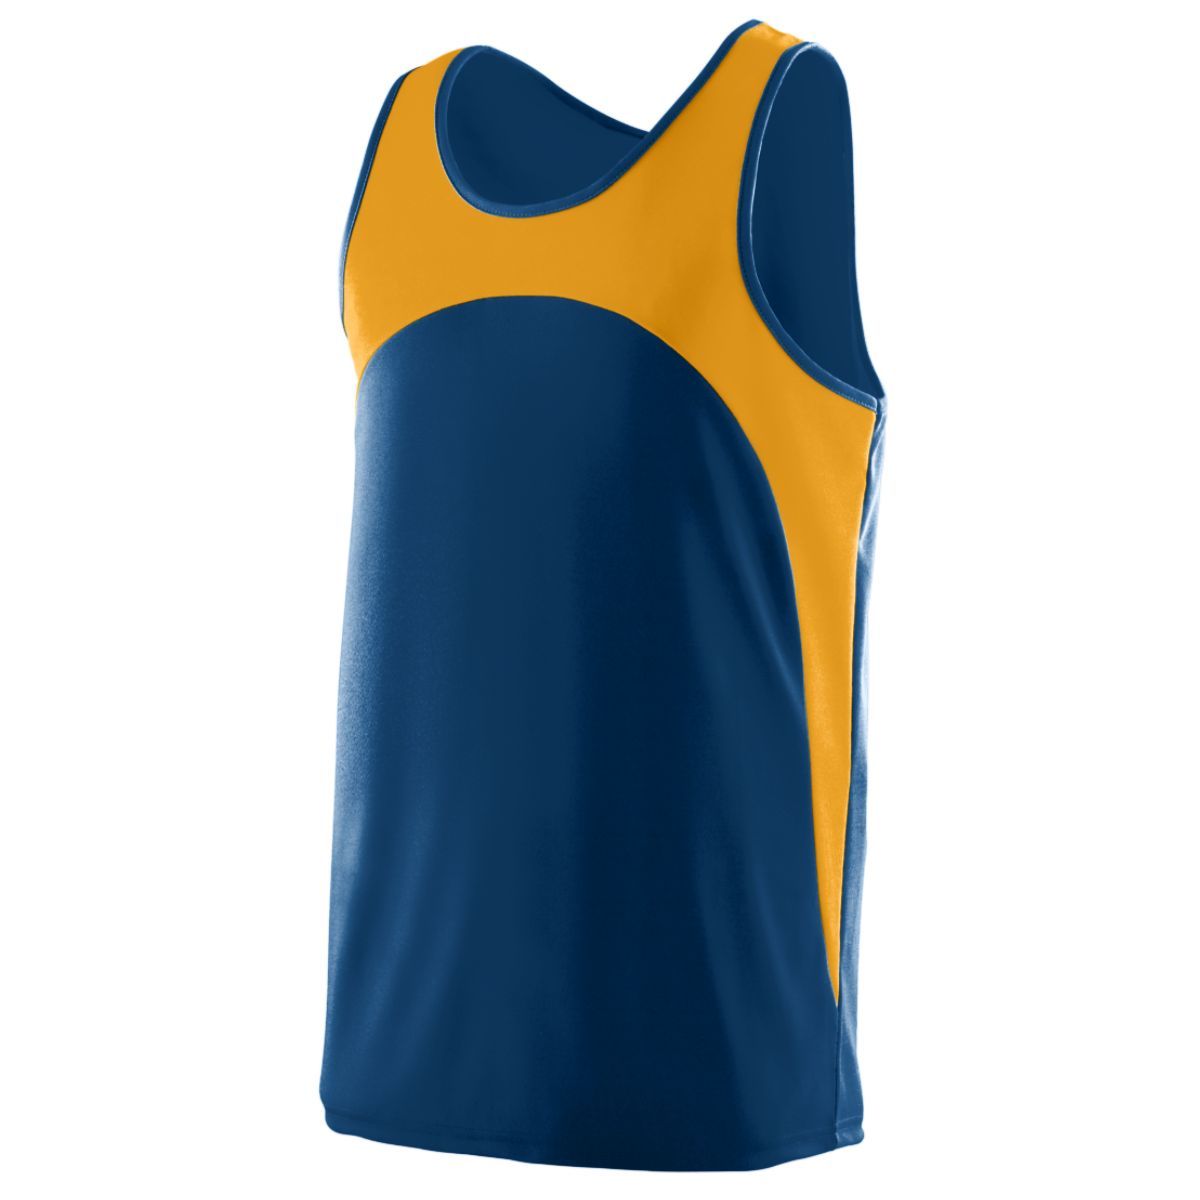 Augusta Sportswear Rapidpace Track Jersey in Navy/Gold  -Part of the Adult, Adult-Jersey, Augusta-Products, Track-Field, Shirts product lines at KanaleyCreations.com